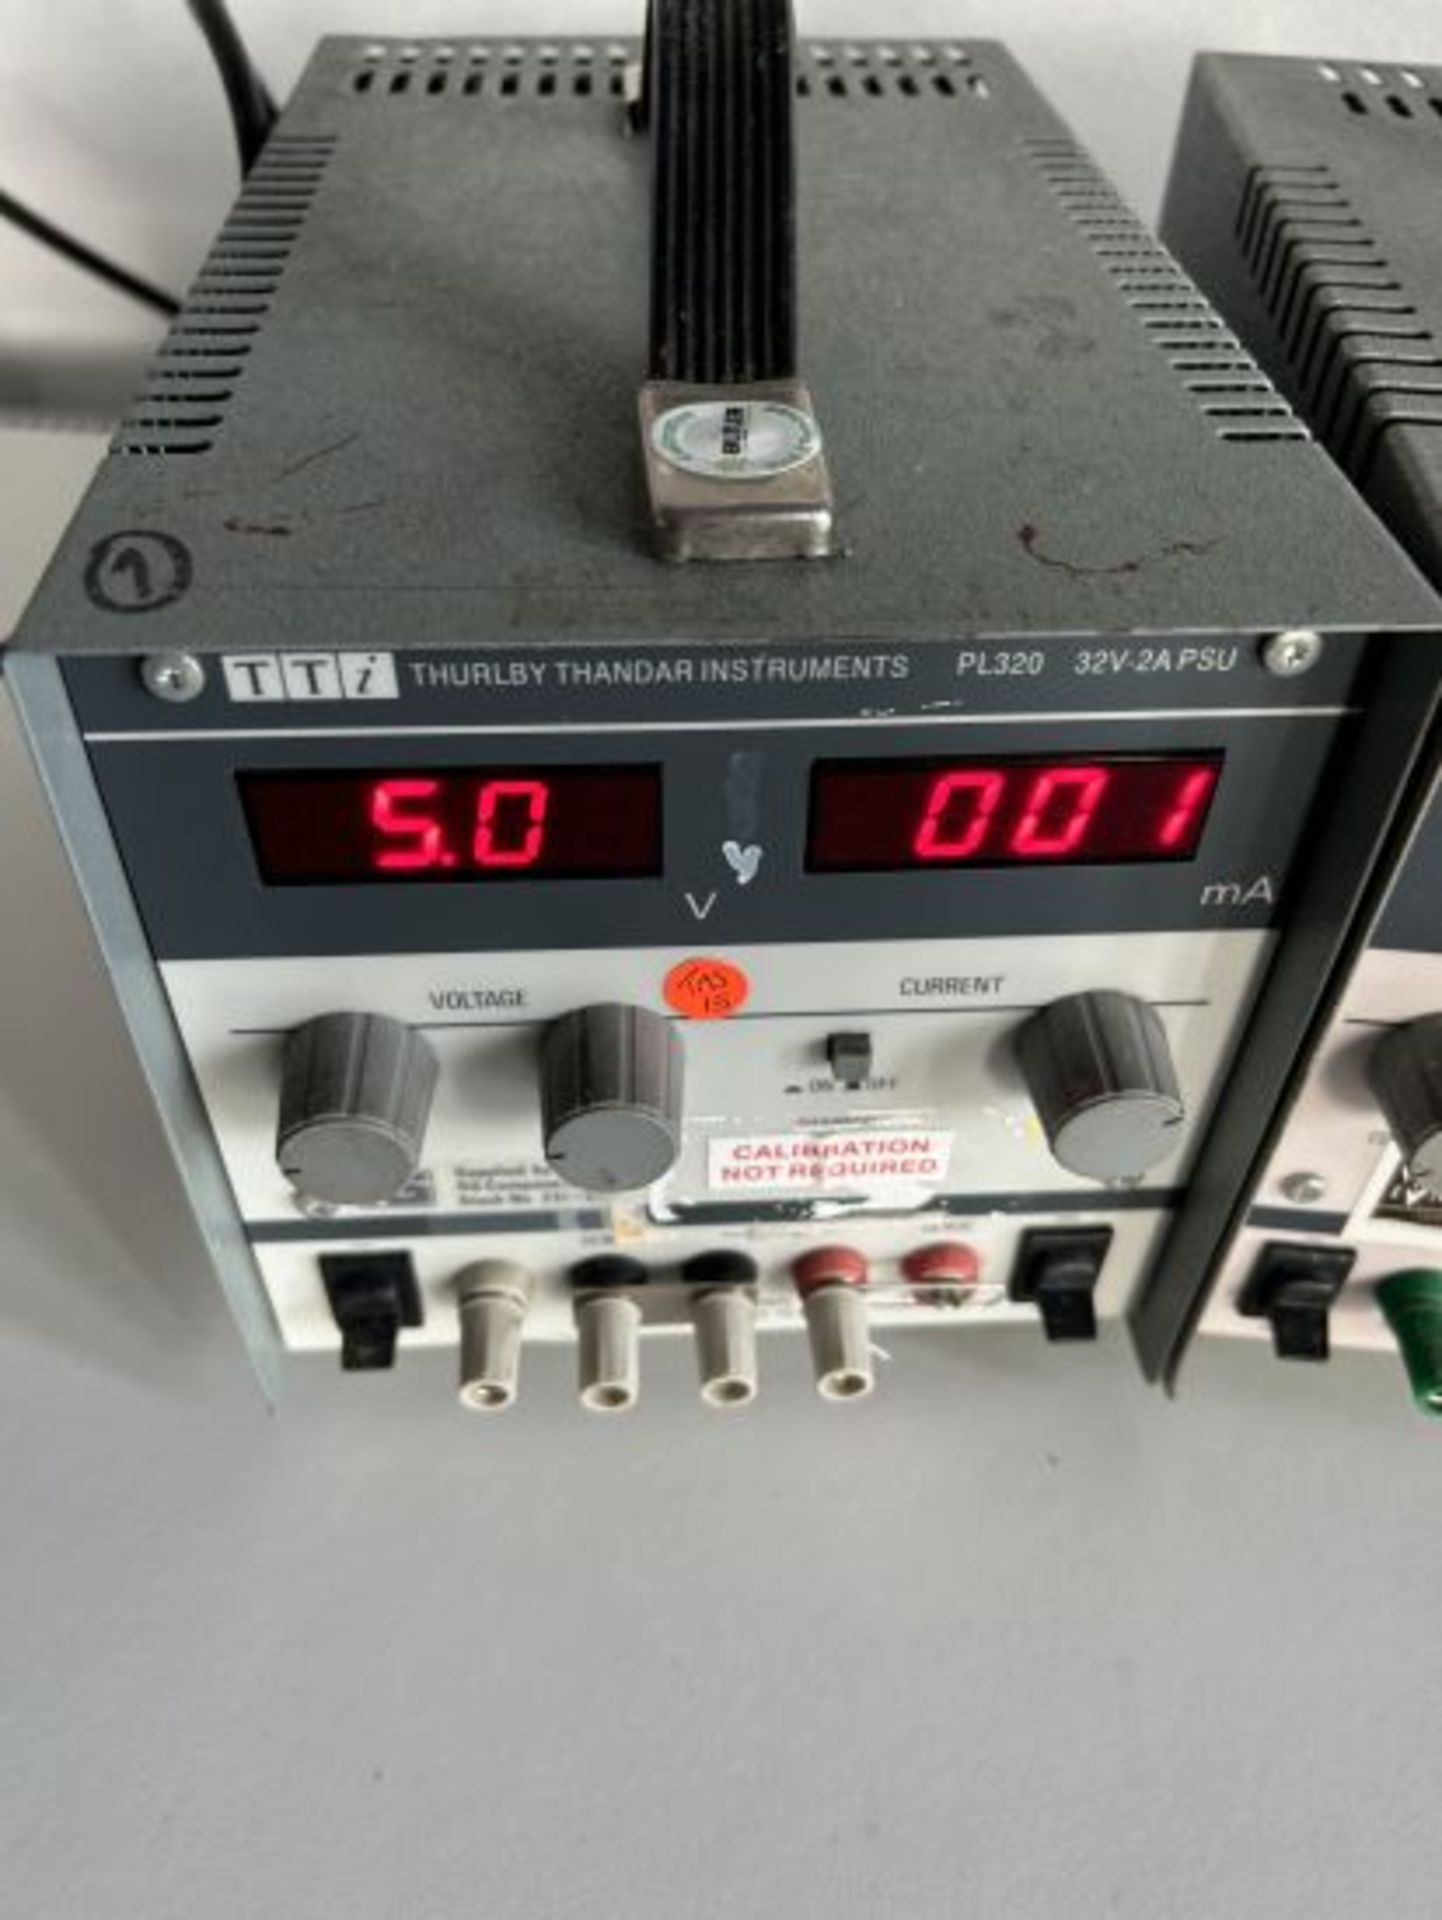 3 x Thurlby Thander PL-320 32V-2A Power Supply Units. - Image 2 of 4